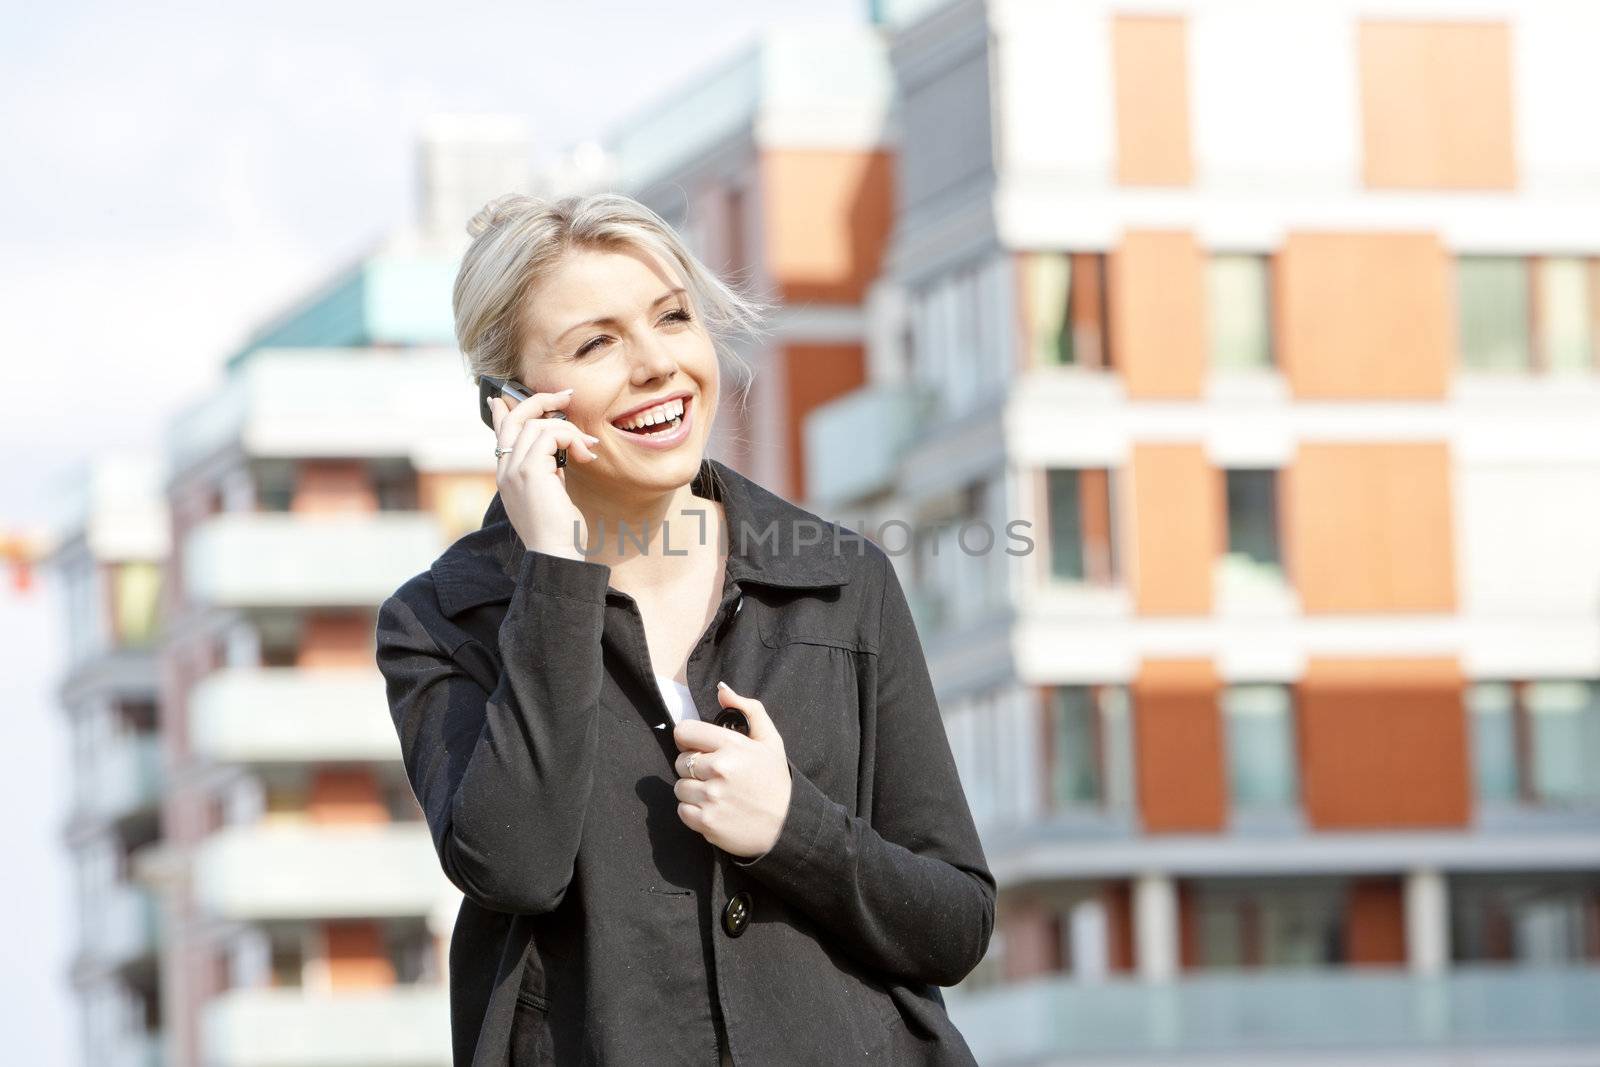 portrait of telephoning young businesswoman